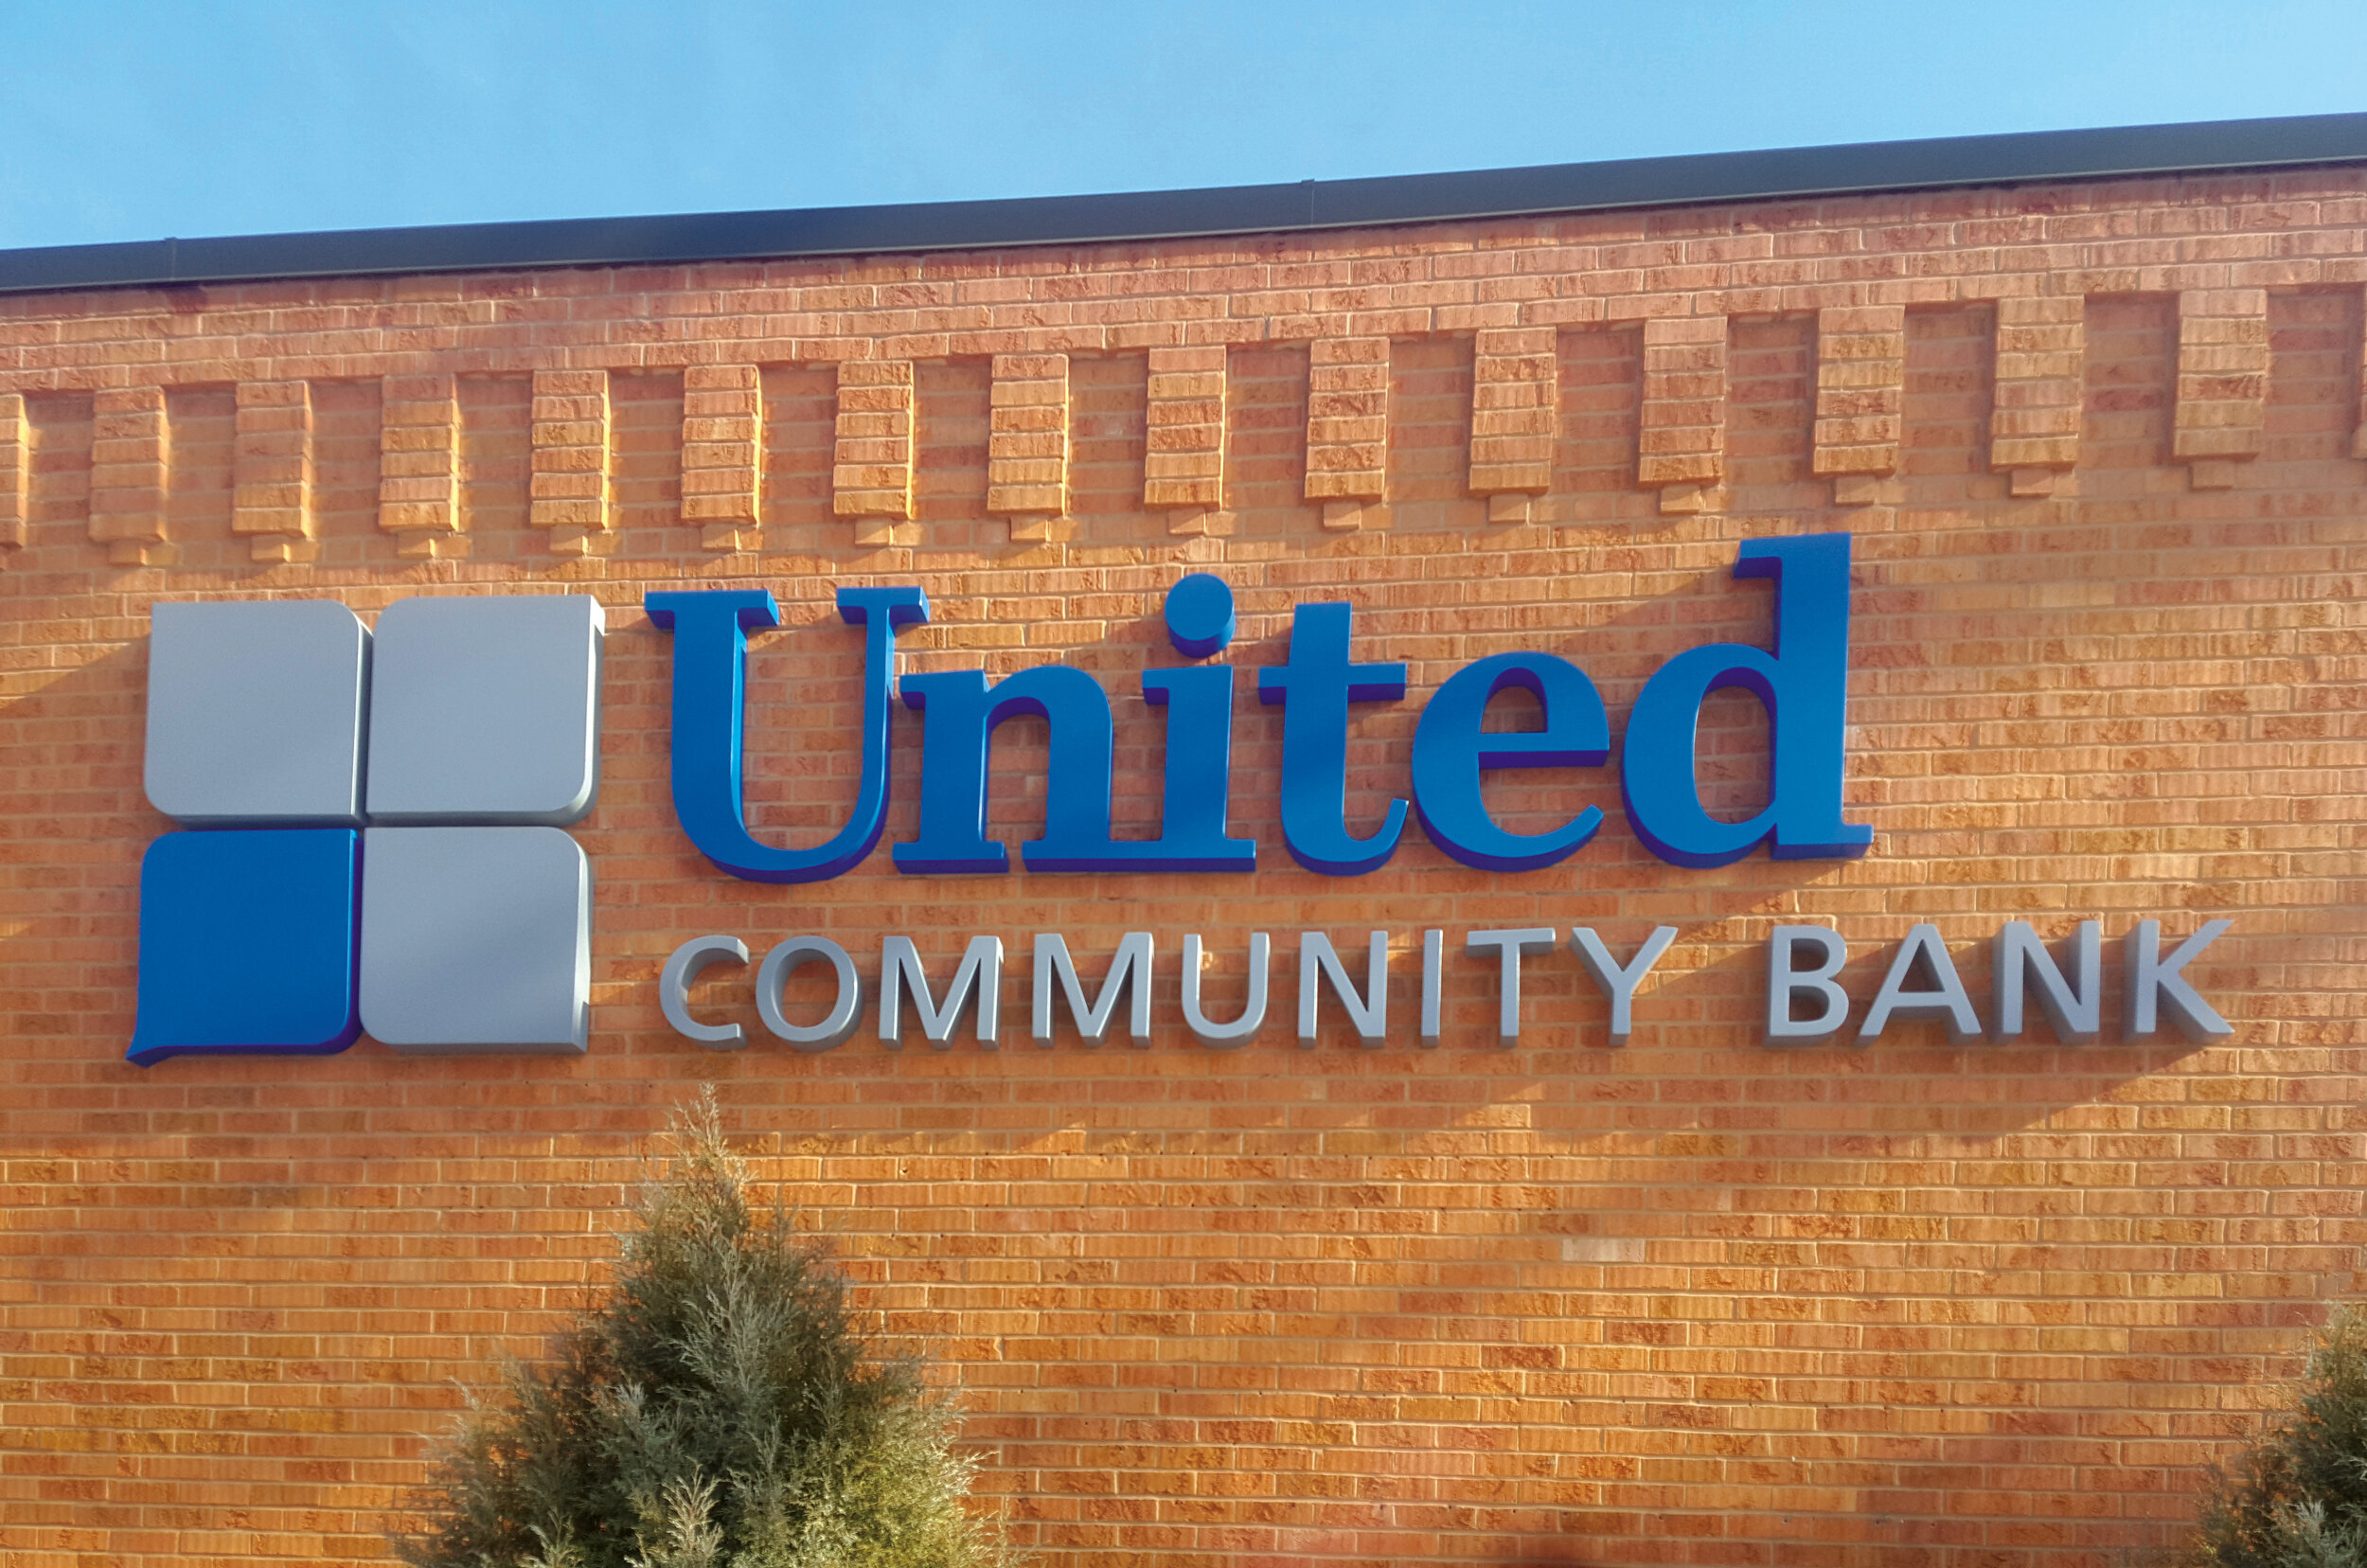   United Community Bank Exterior ID Signs  